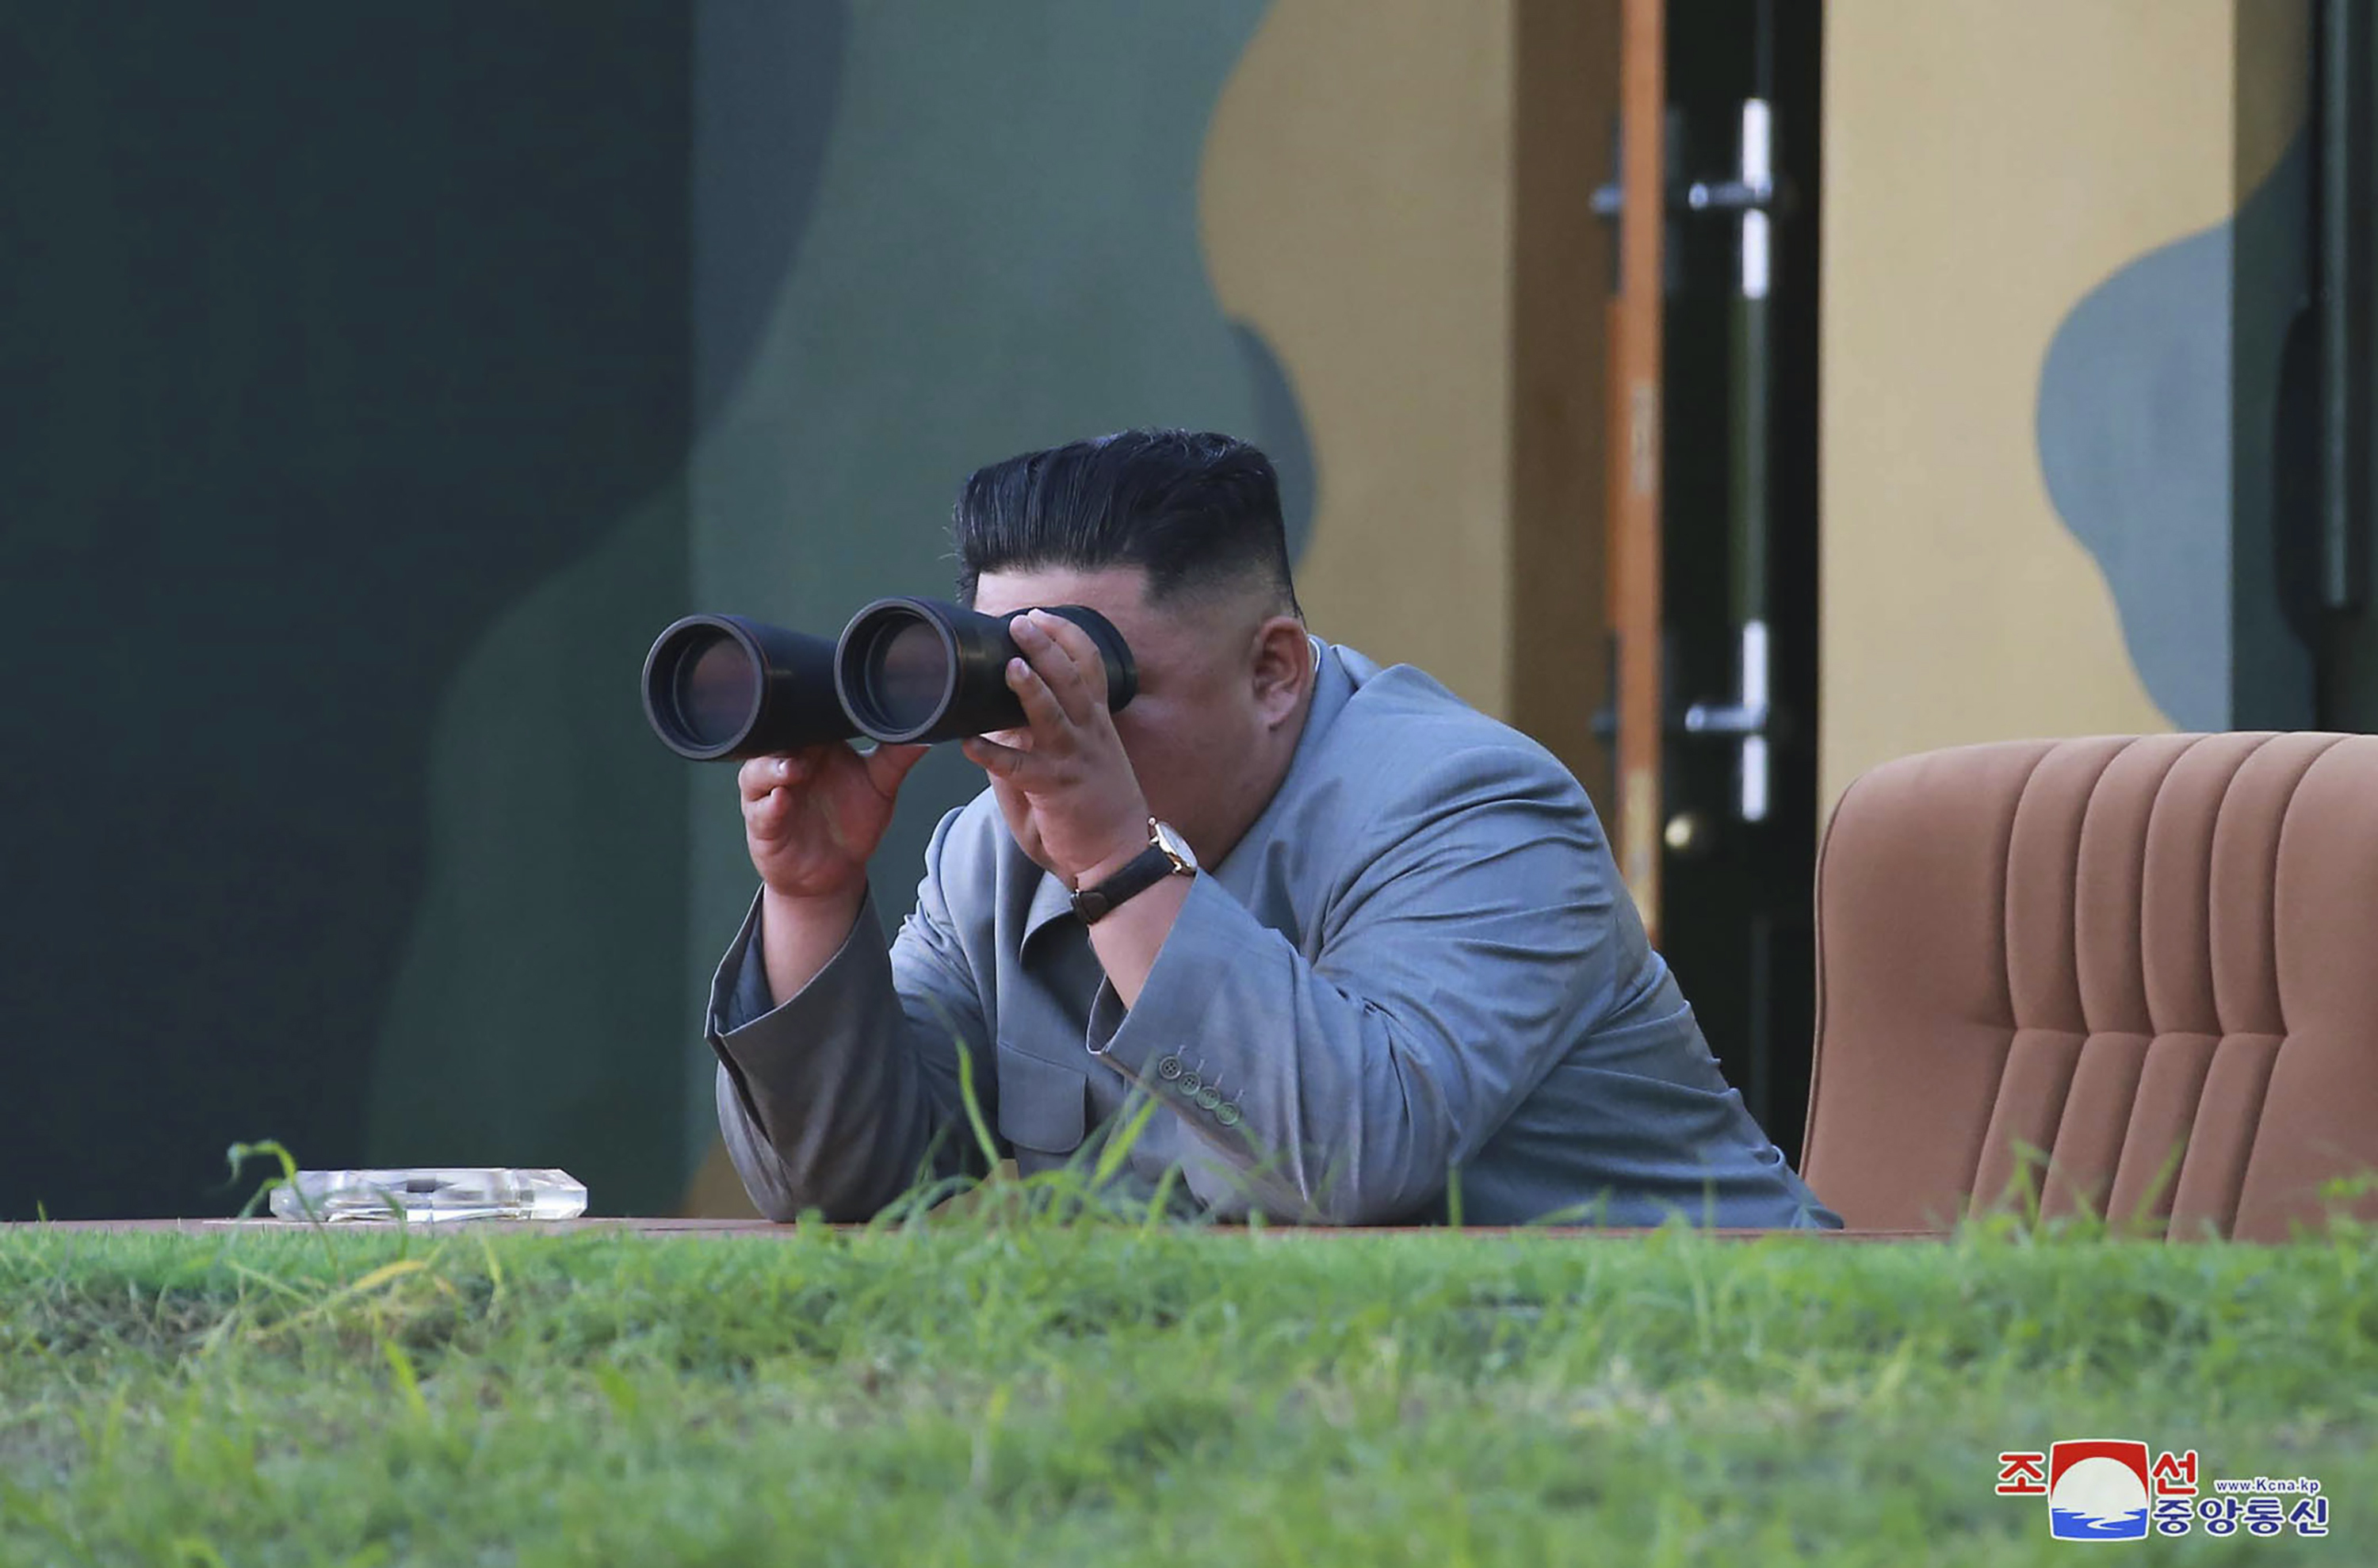 In this Thursday, July 25, 2019, photo provided on Friday, July 26, 2019, by the North Korean government, North Korean leader Kim Jong Un watches a missile test in North Korea.  A day after two North Korean missile launches rattled Asia, the nation announced Friday that its leader Kim supervised a test of a new-type tactical guided weapon that was meant to be a 